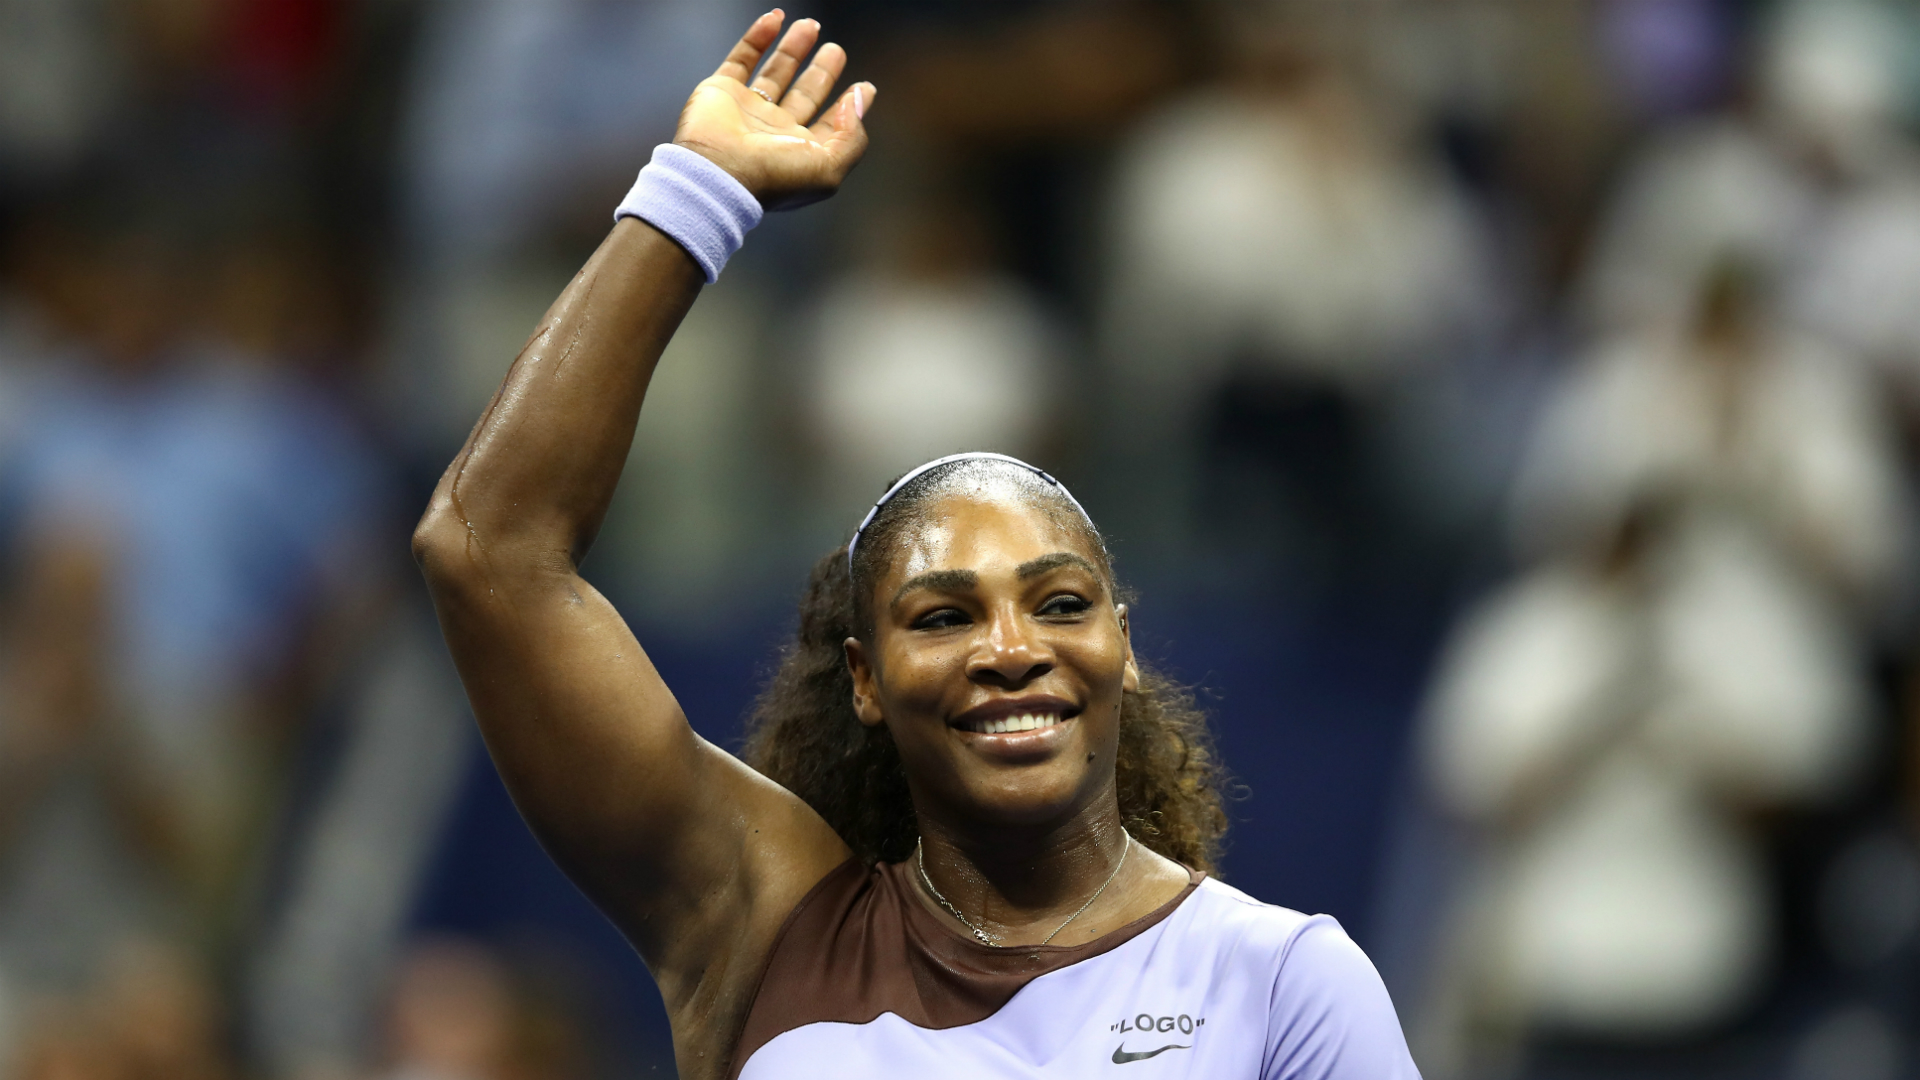 The 2019 Australian Open will provide Serena Williams with her next opportunity to equal Margaret Court's grand slam record of 24 titles.